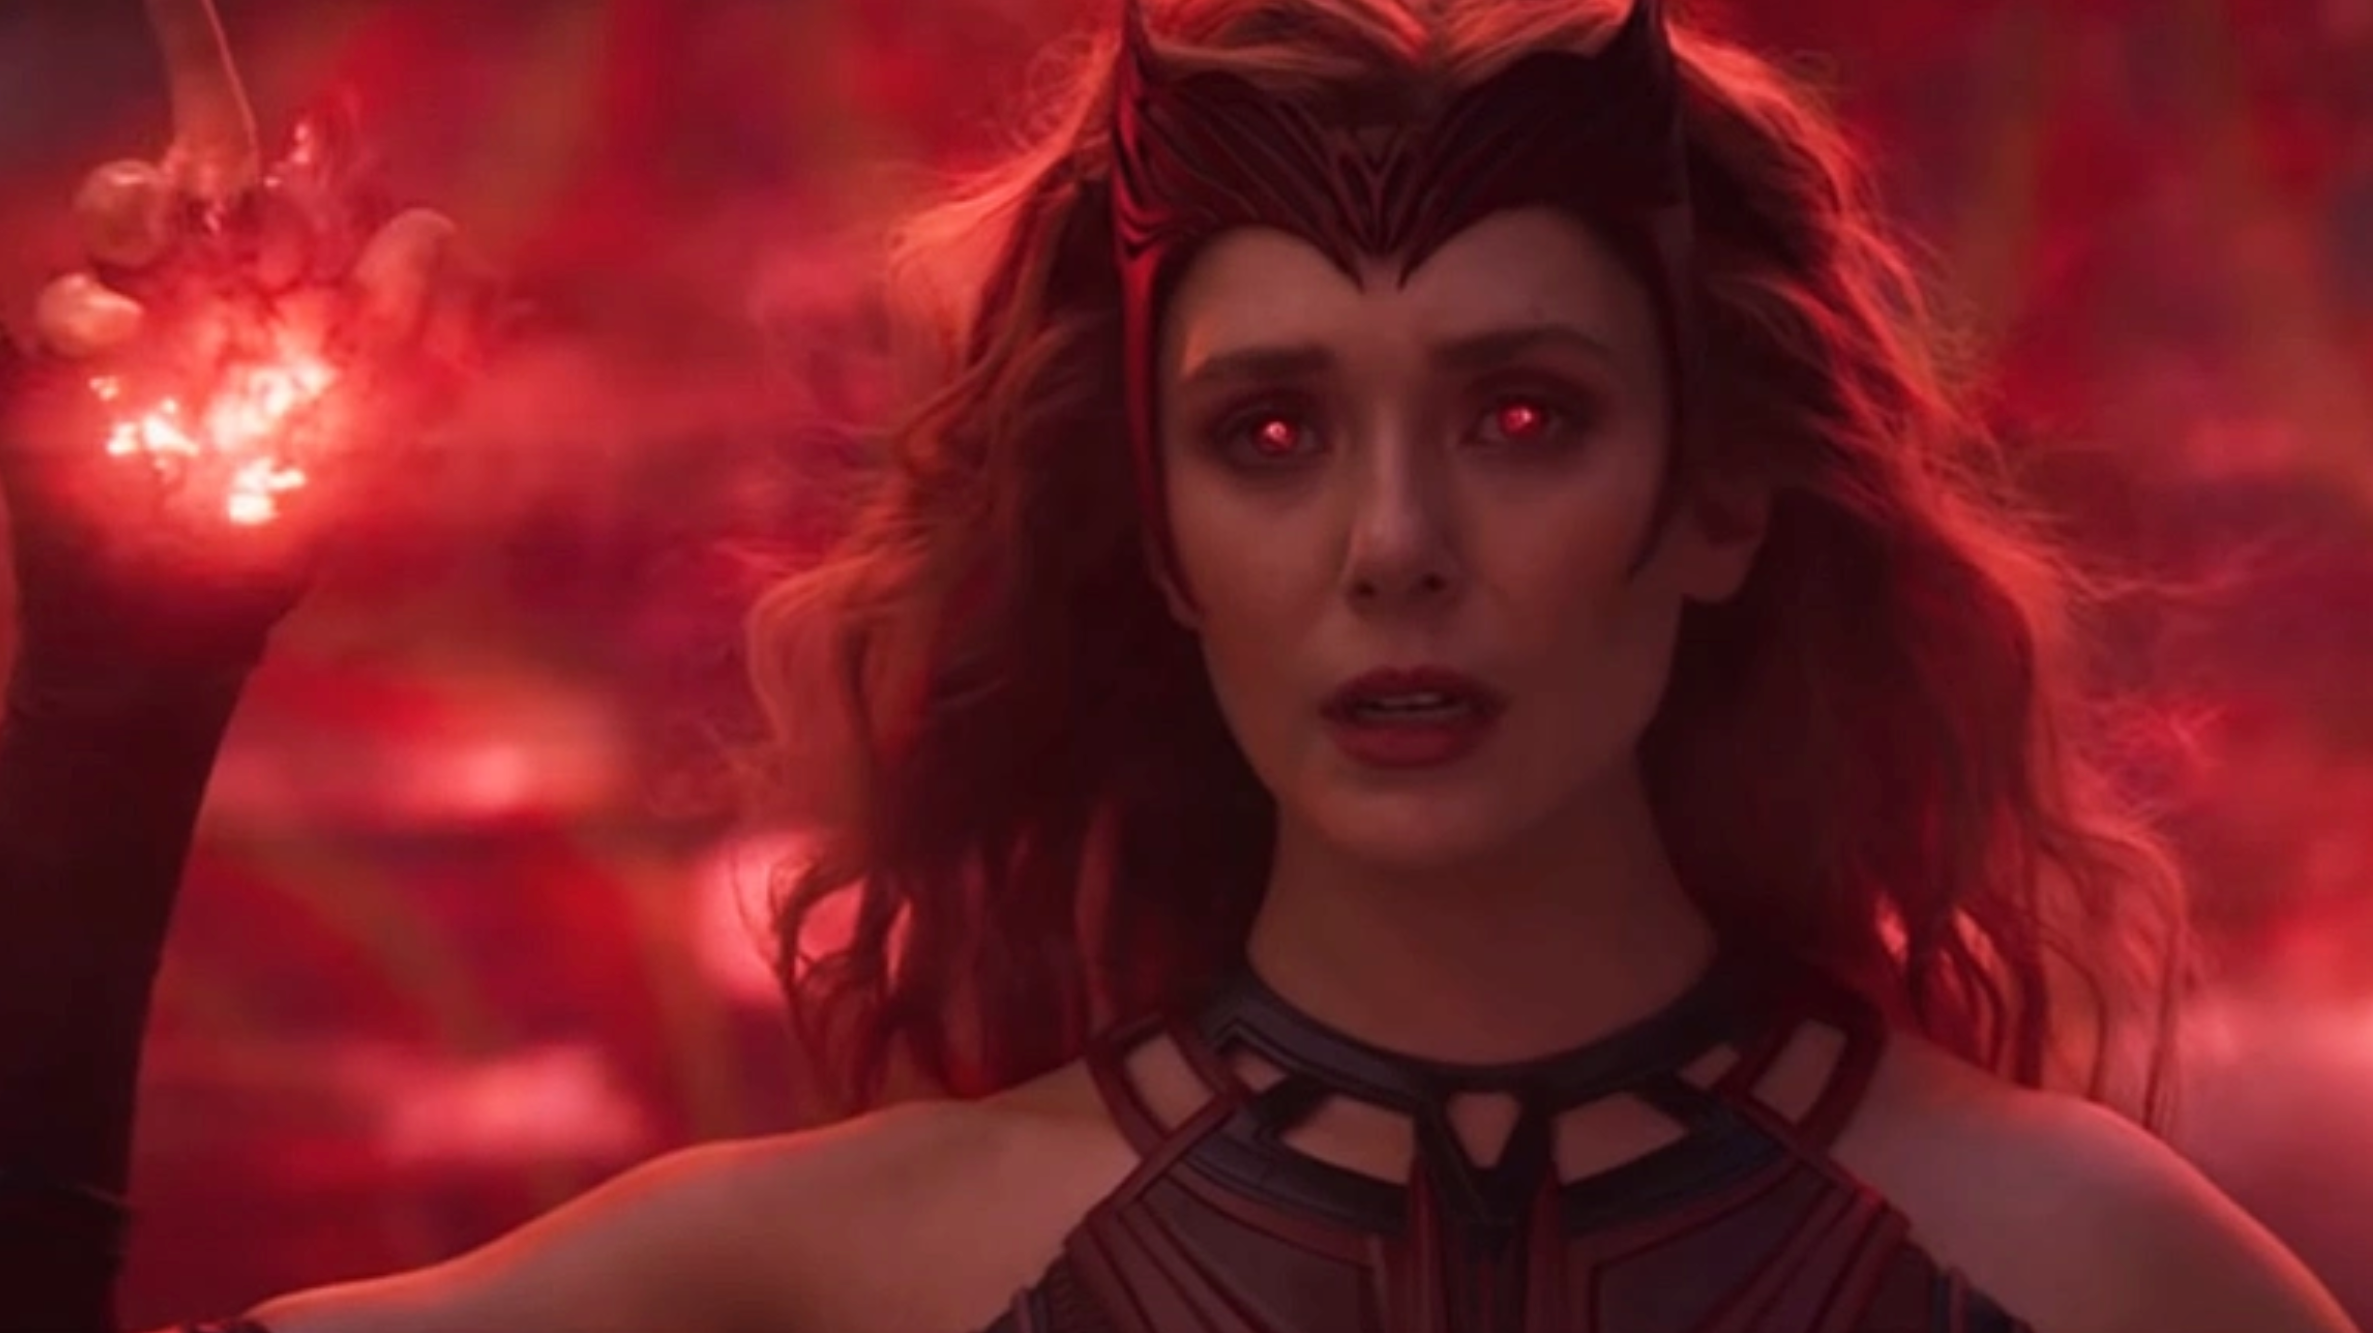 Wanda Maximoff becomes the Scarlet Witch in WandaVision